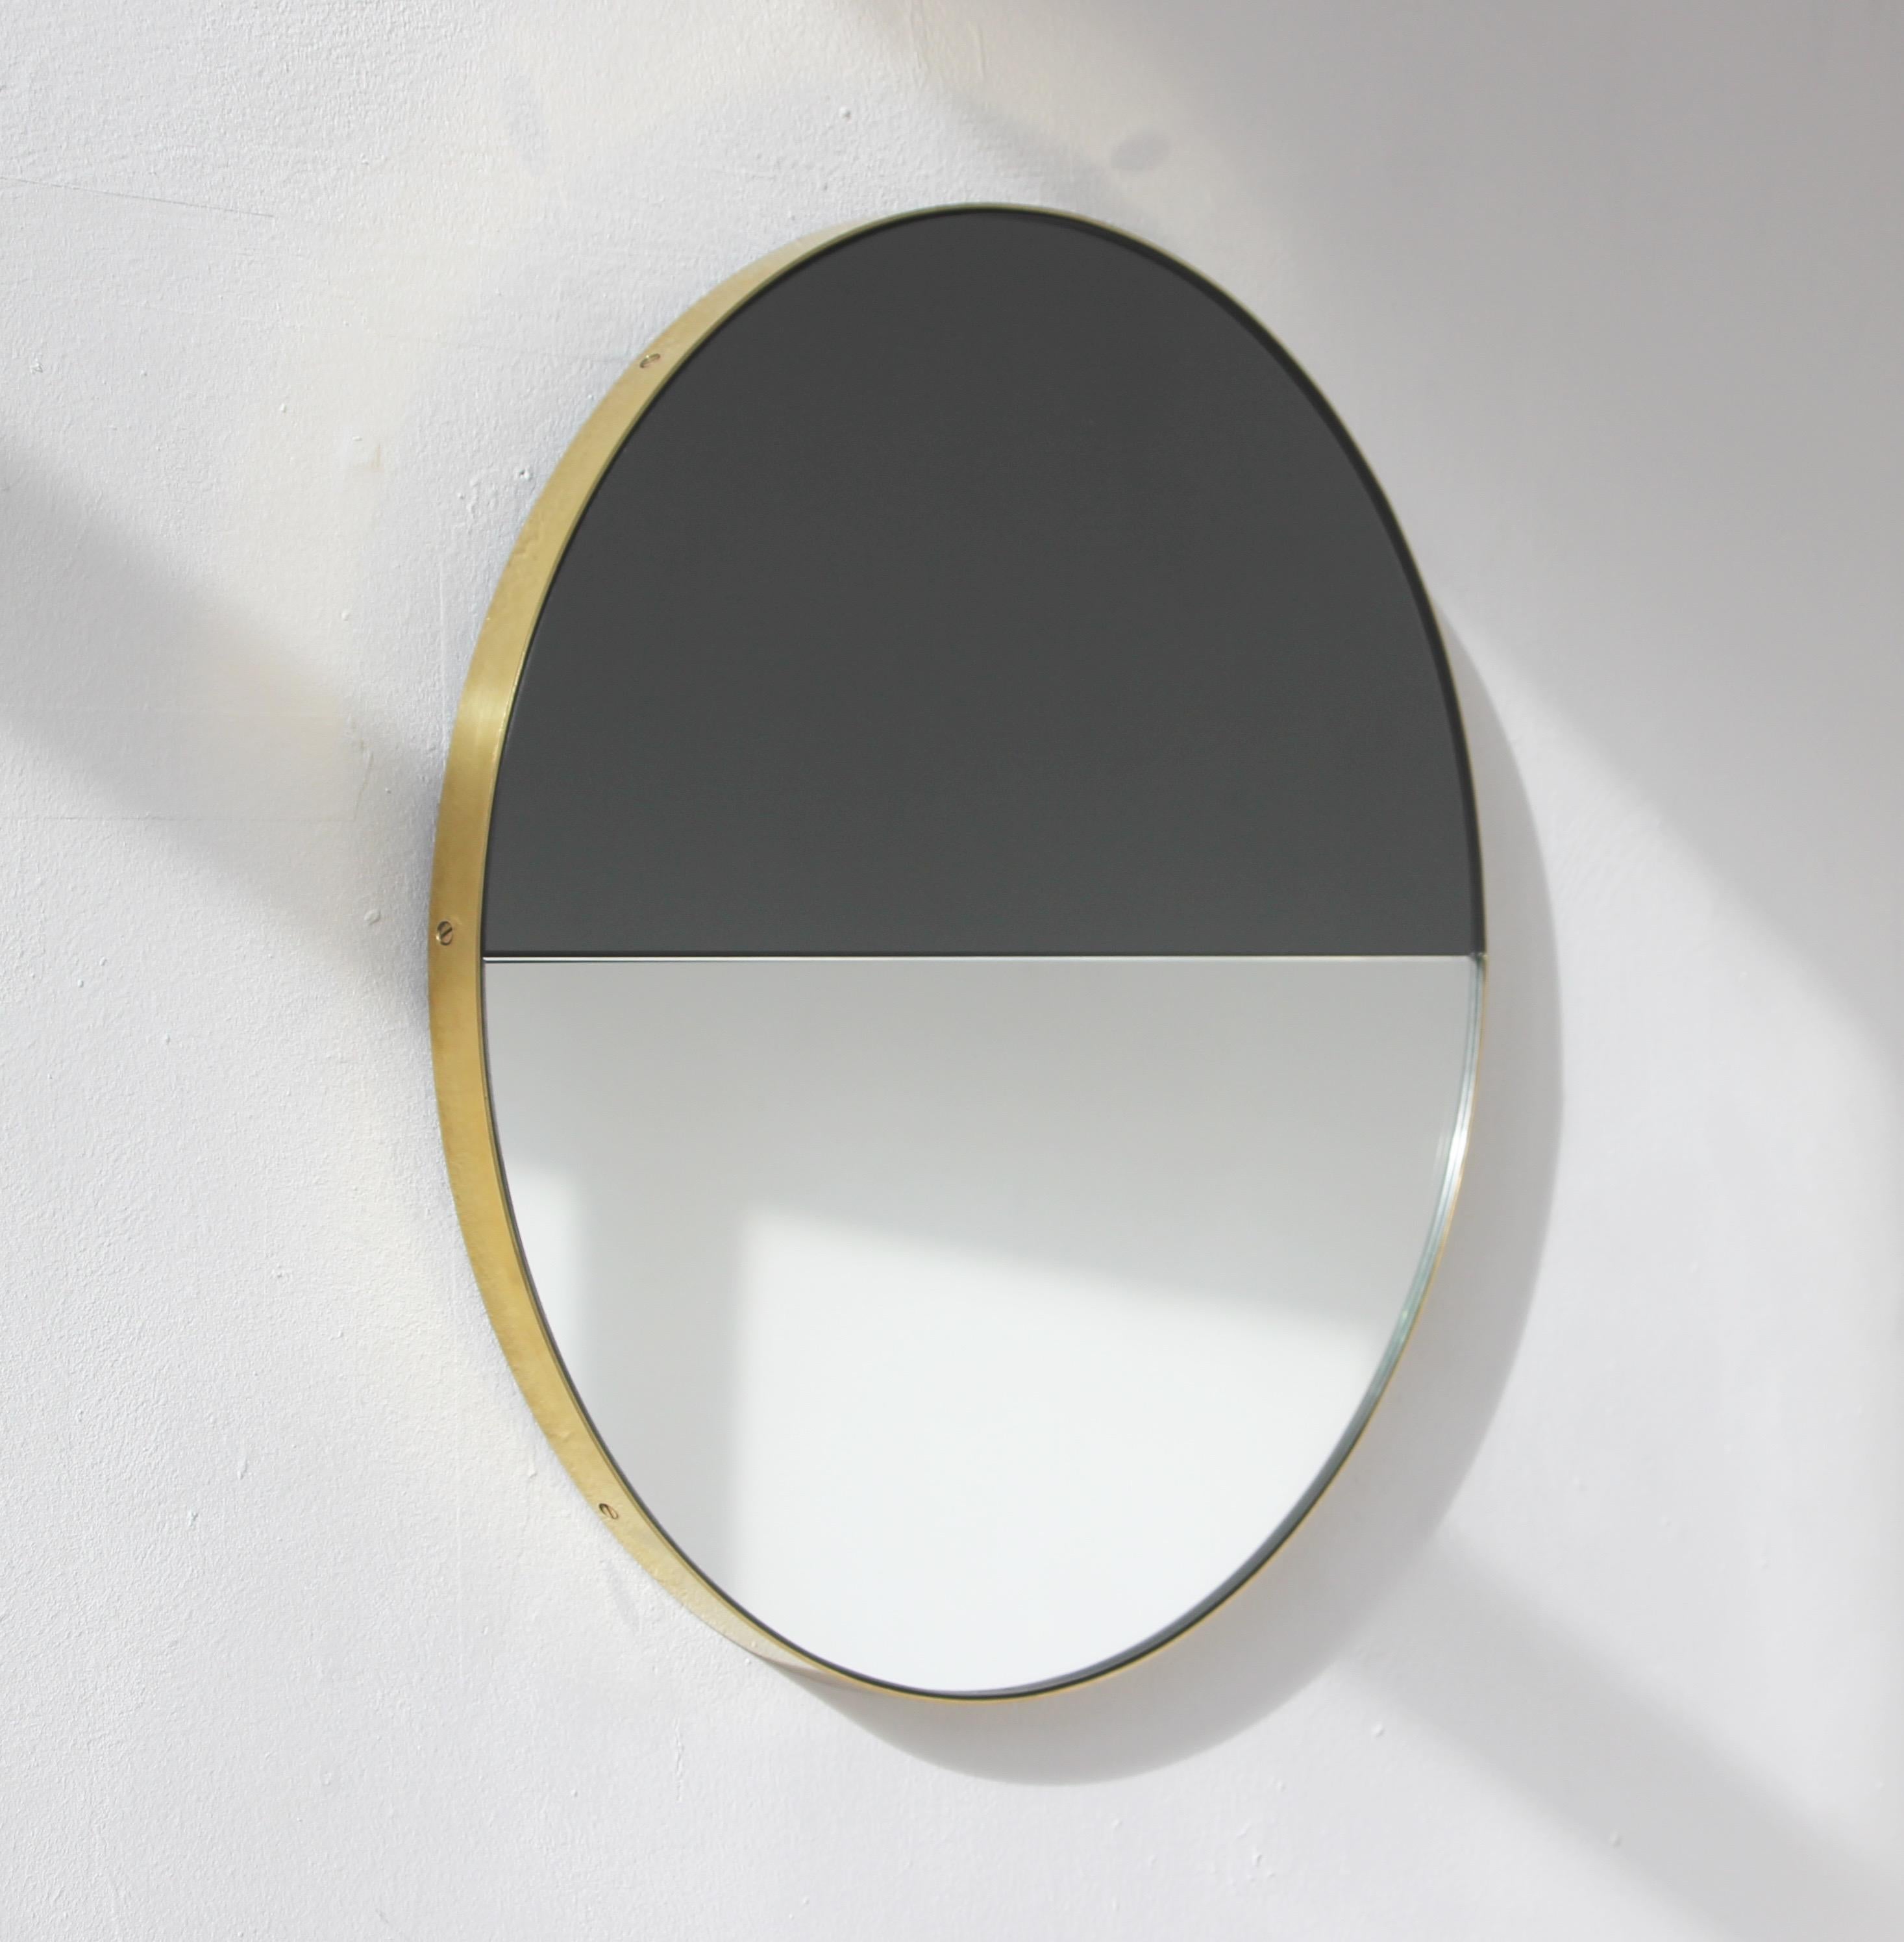 Contemporary handcrafted mixed tinted black and std. silver Orbis Dualis™ mirror with an elegant solid brushed brass frame. Fitted with a quality hanging system that allows a flexible installation in 6 different positions (see pictures for